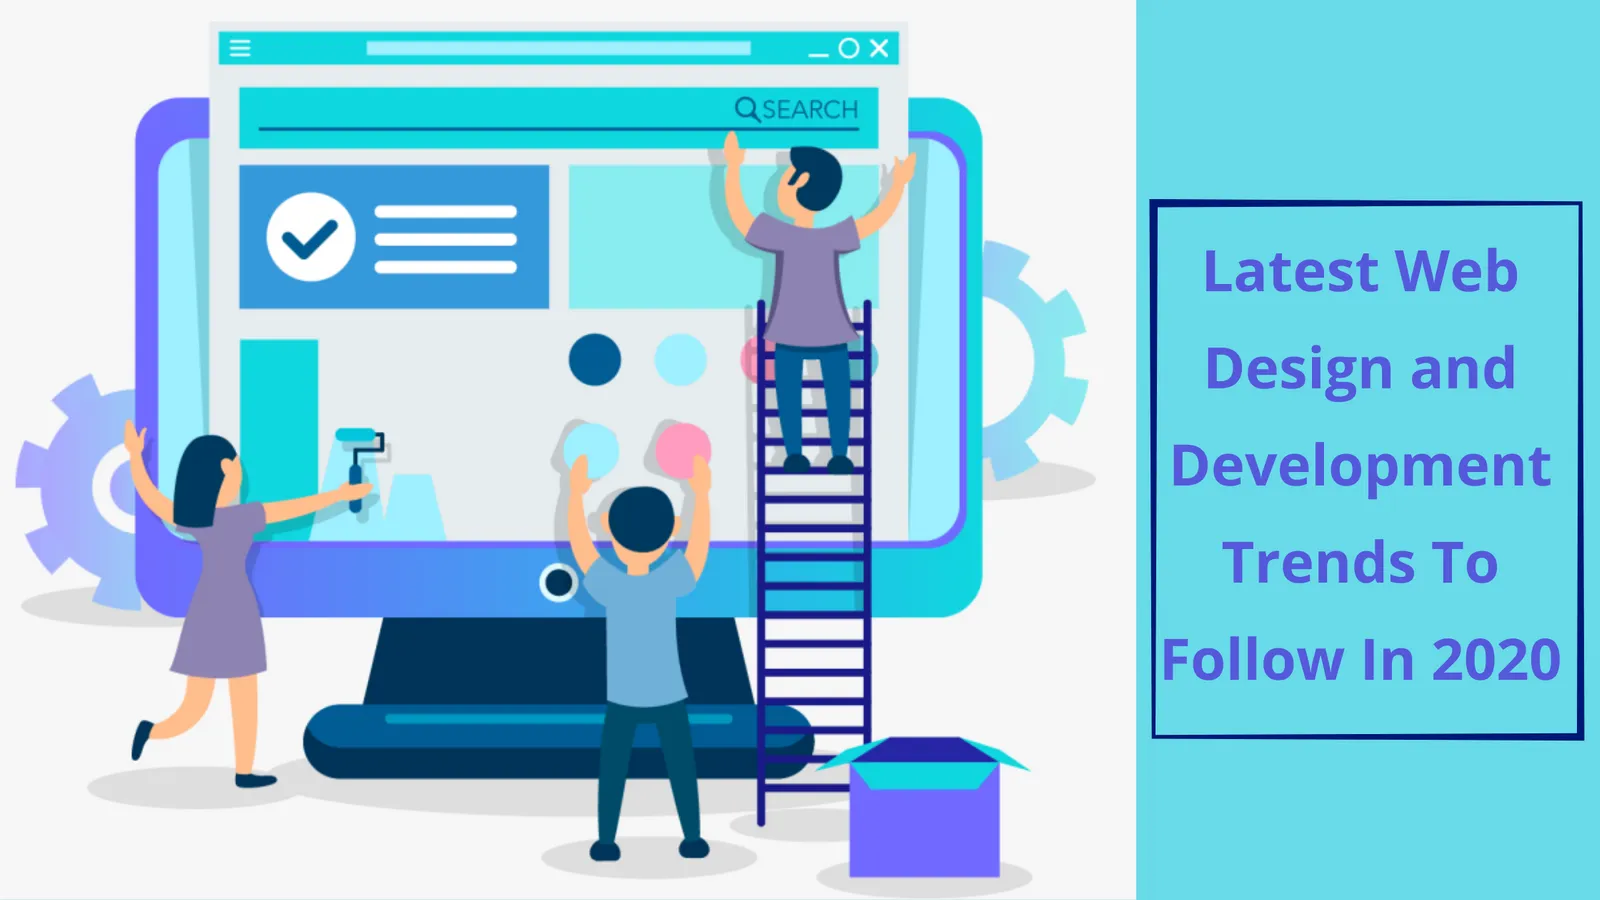 Latest Web Design and Development Trends To Follow In 2020